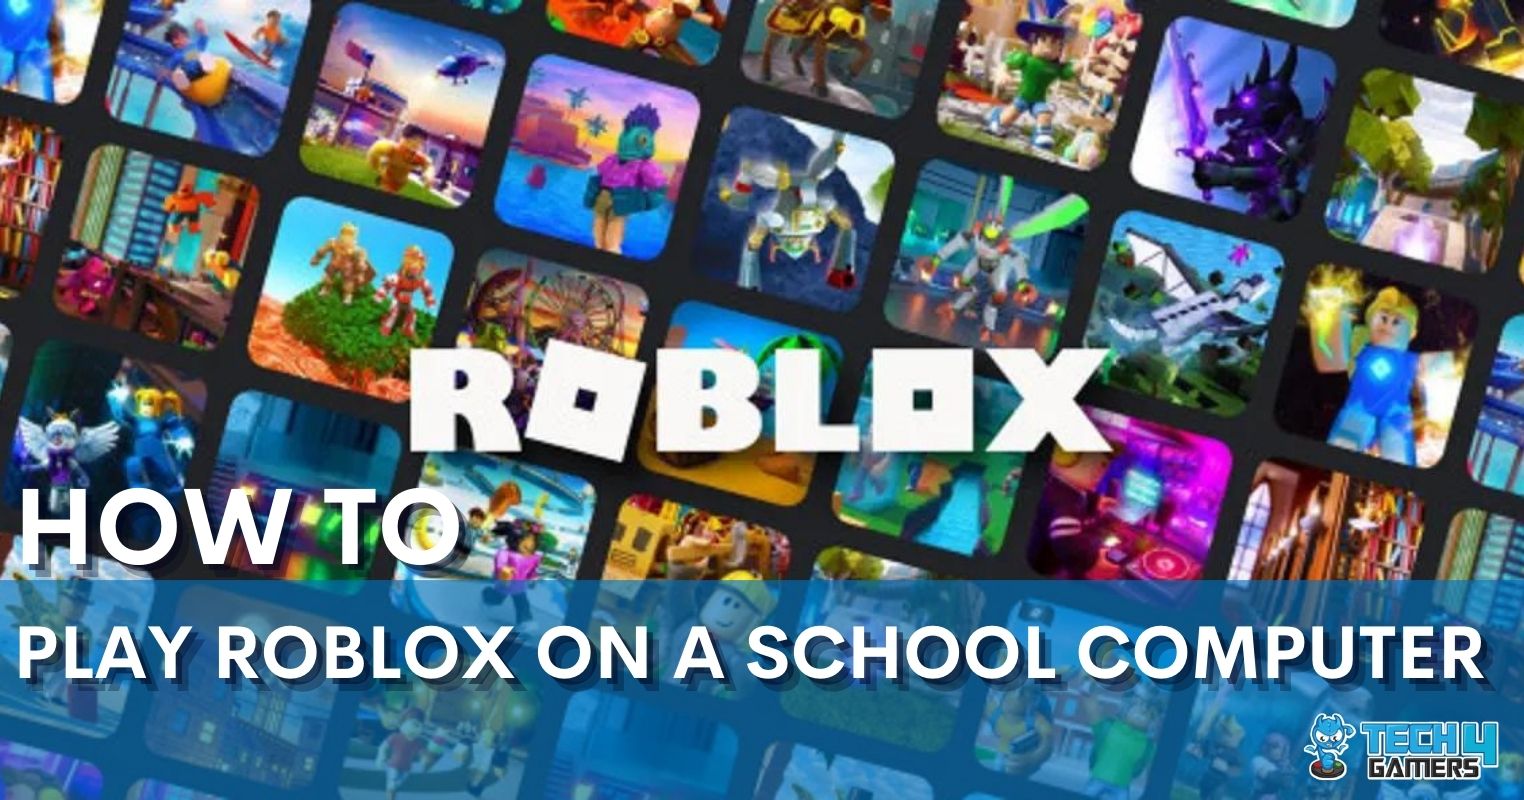 How To Play Roblox Unblocked At School